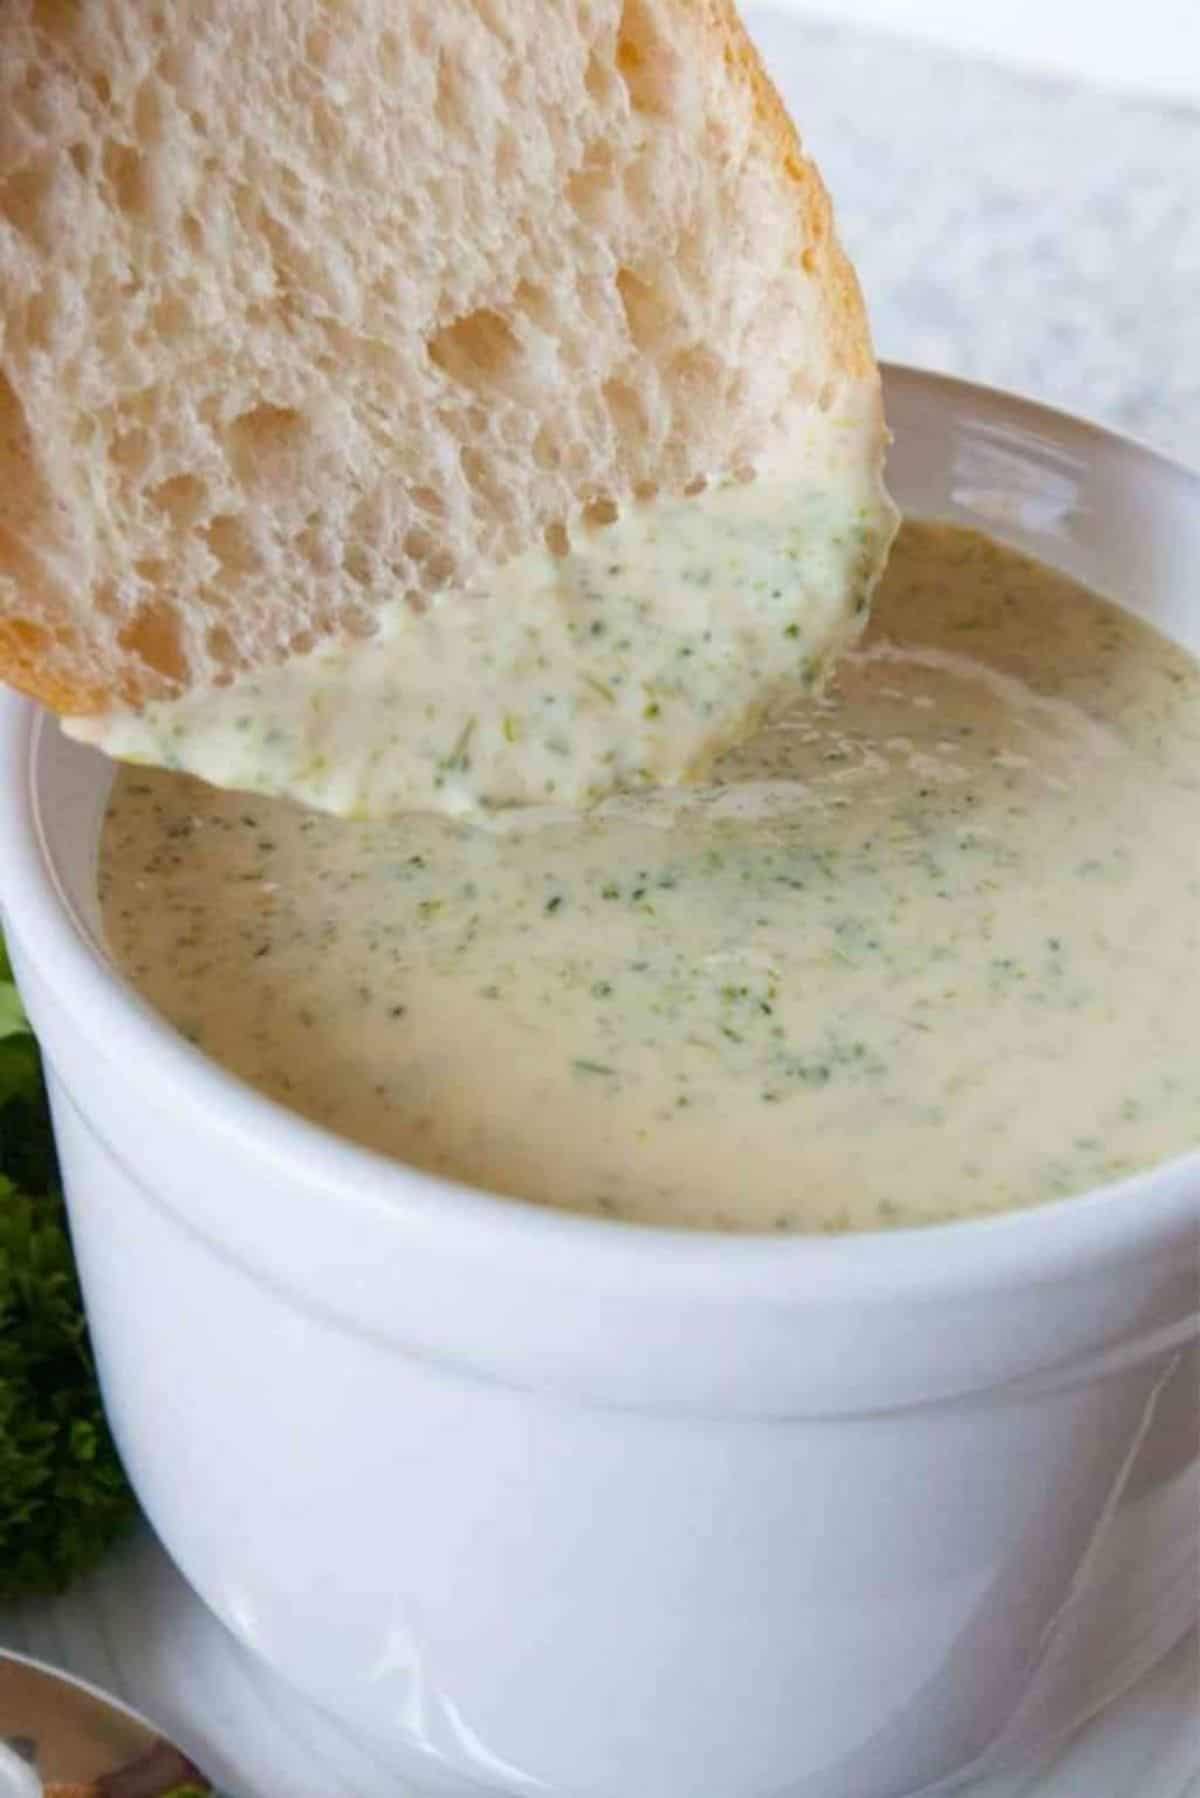 A slice of bread dipped in a bowl of Broccoli Cheese Soup.